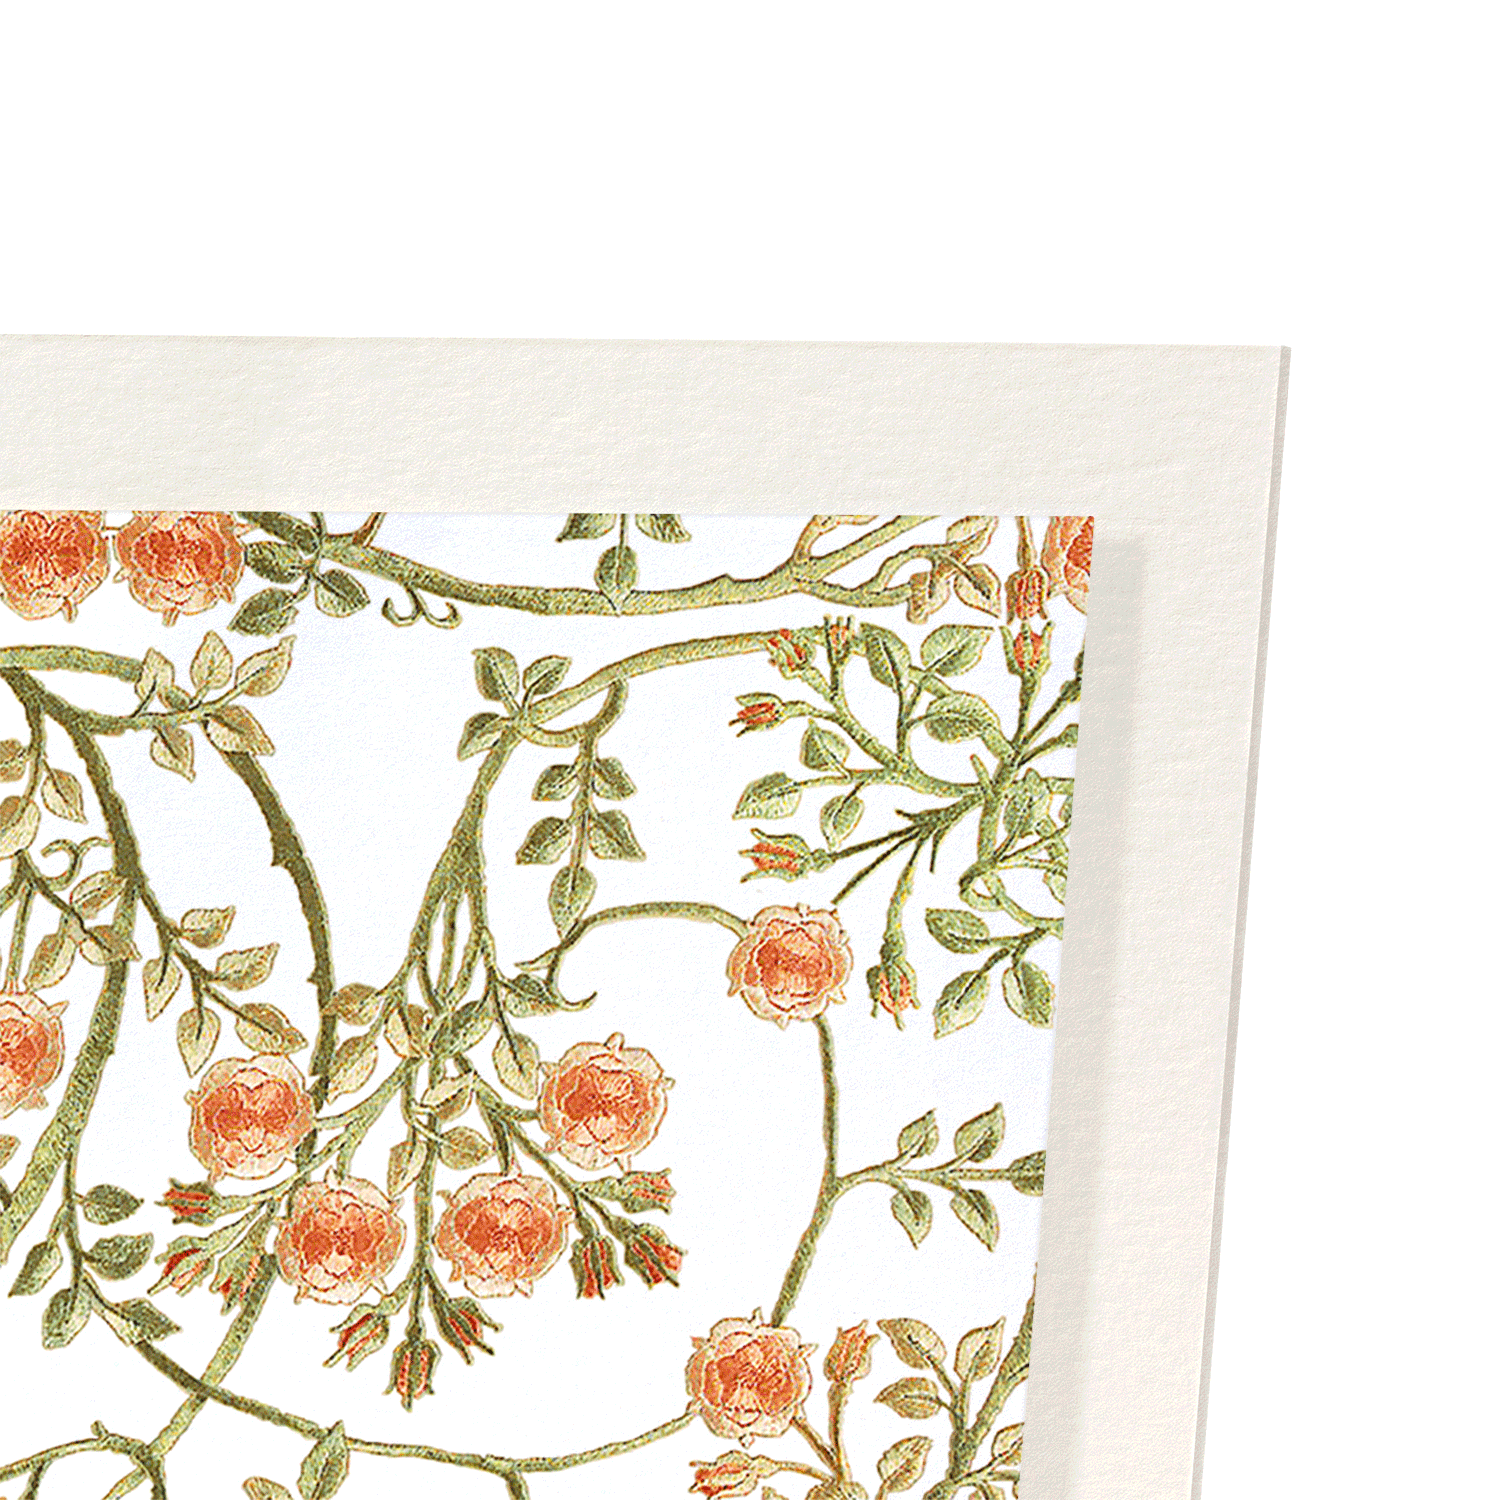 BRIAR ROSES EMBROIDERY